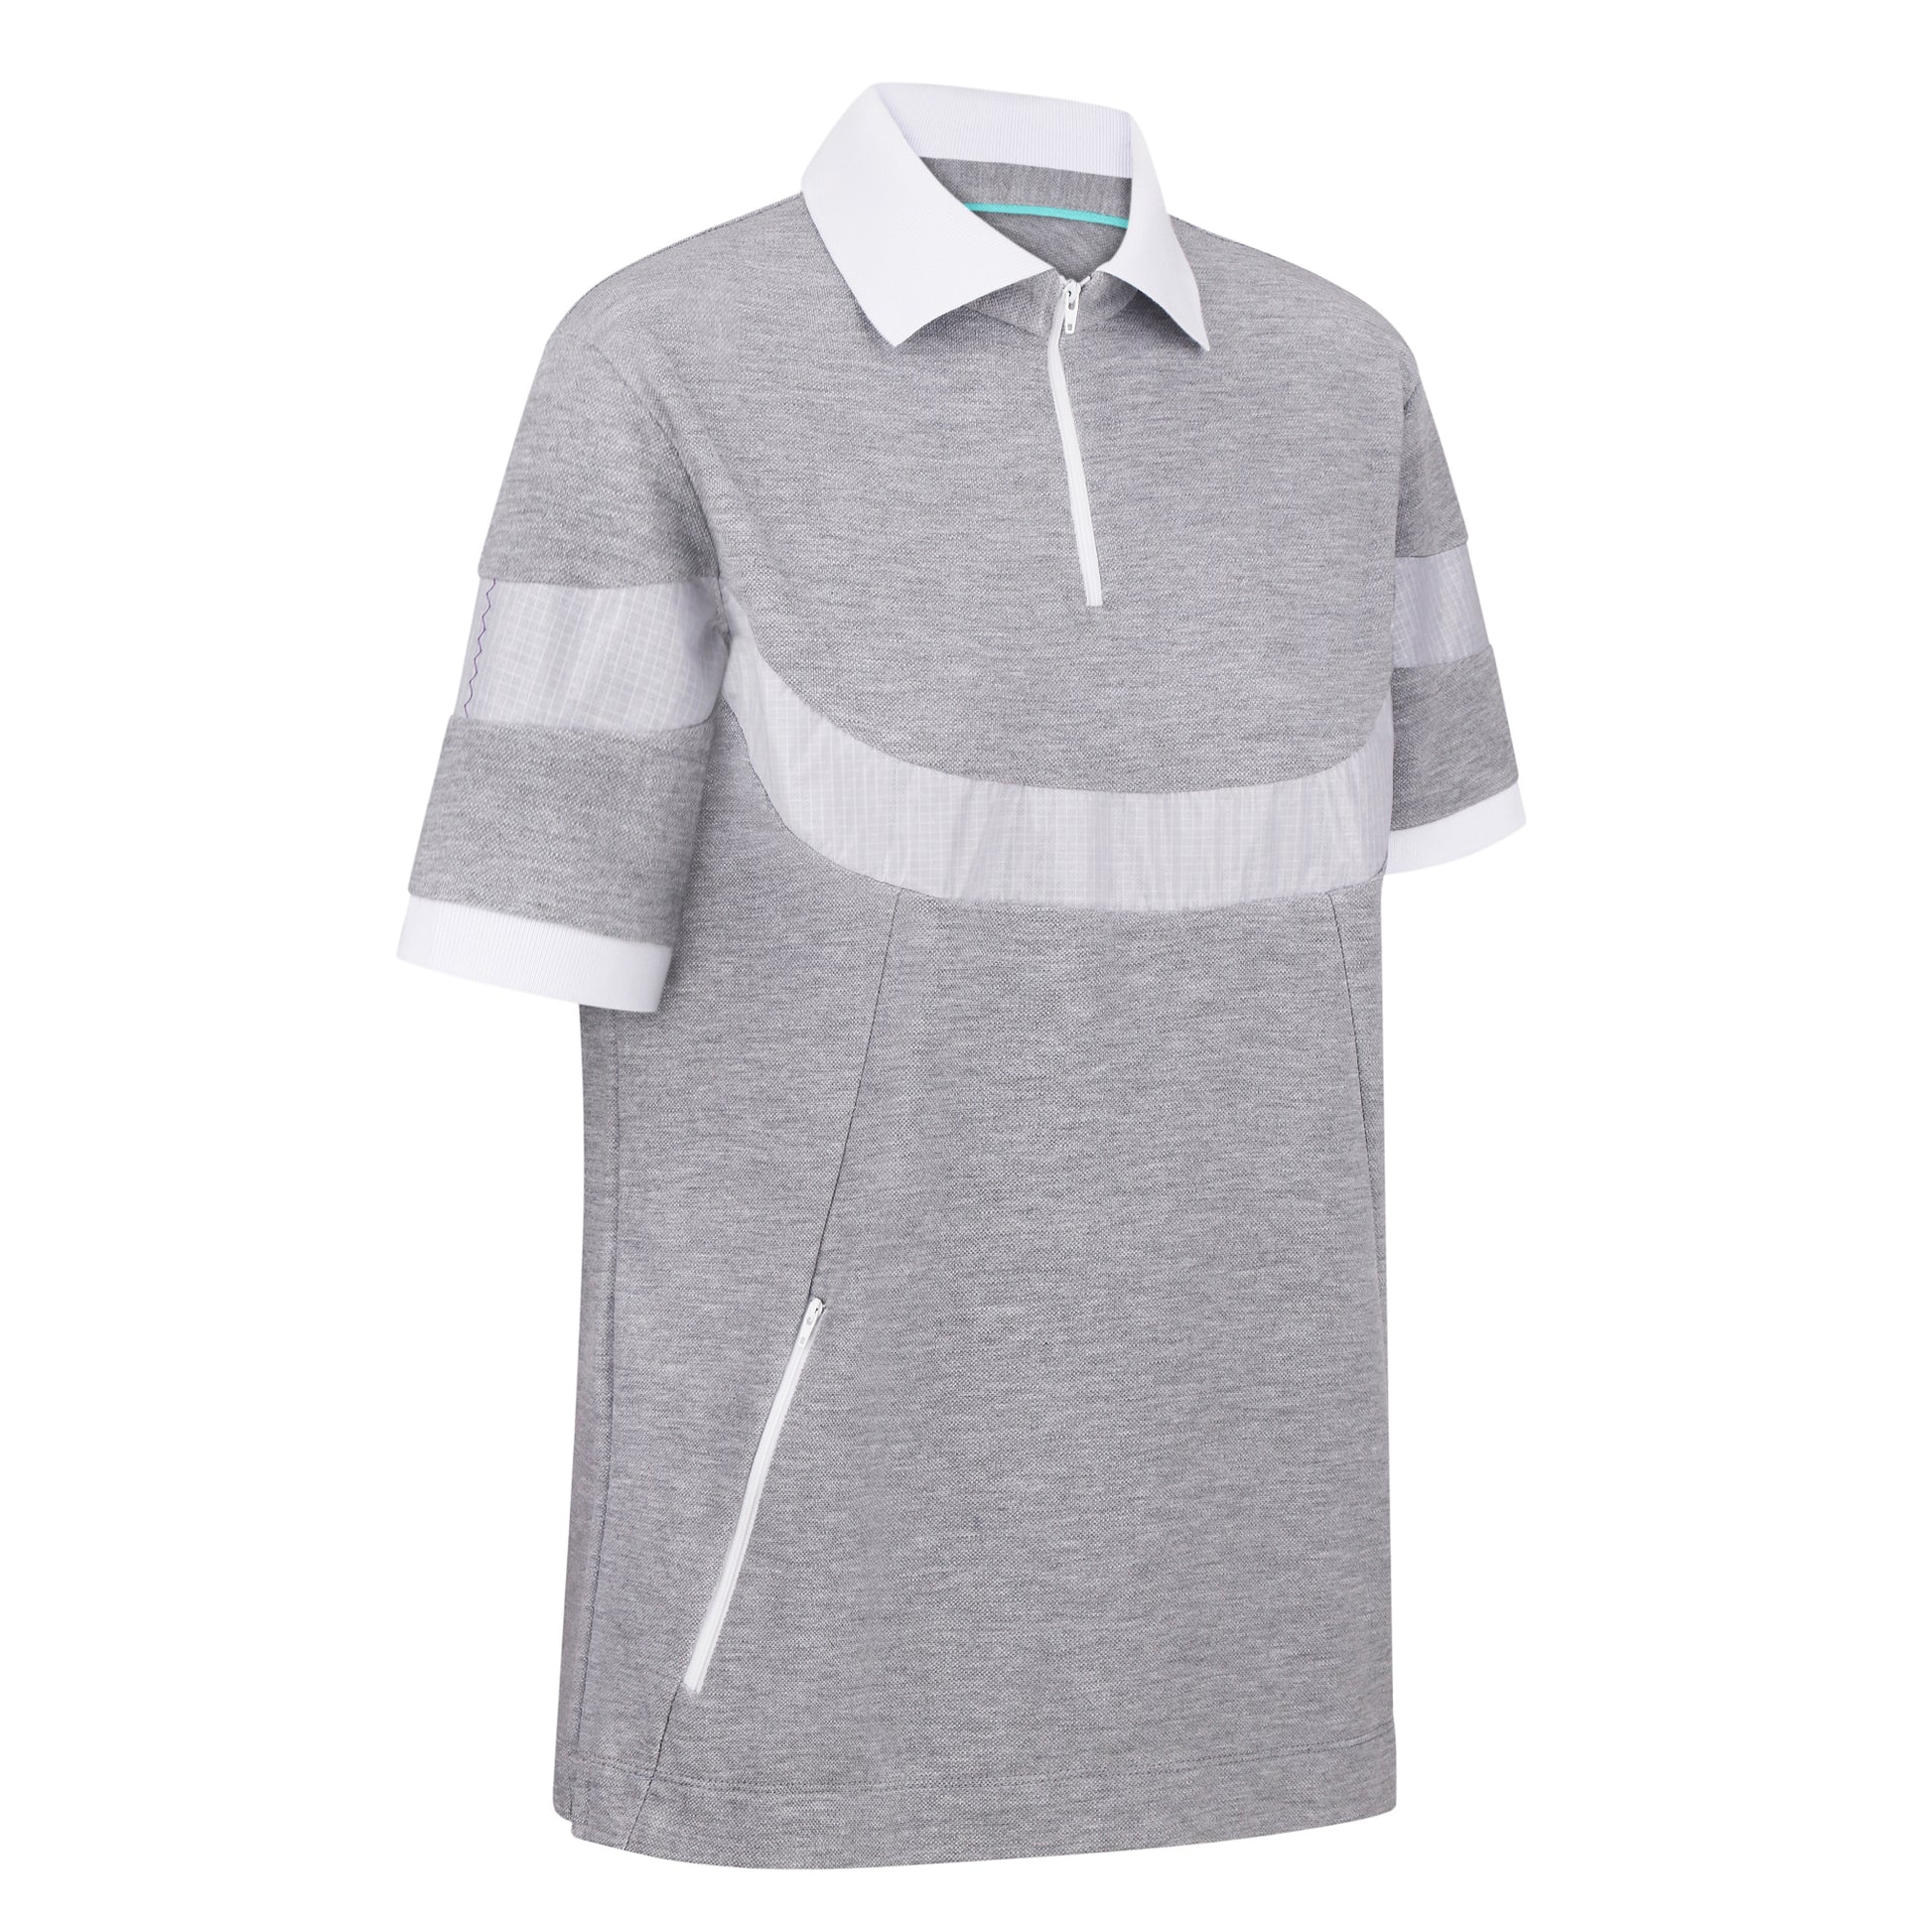 Mens polo shirt with short sleeves from REwind - manufacturer brand from Ukraine